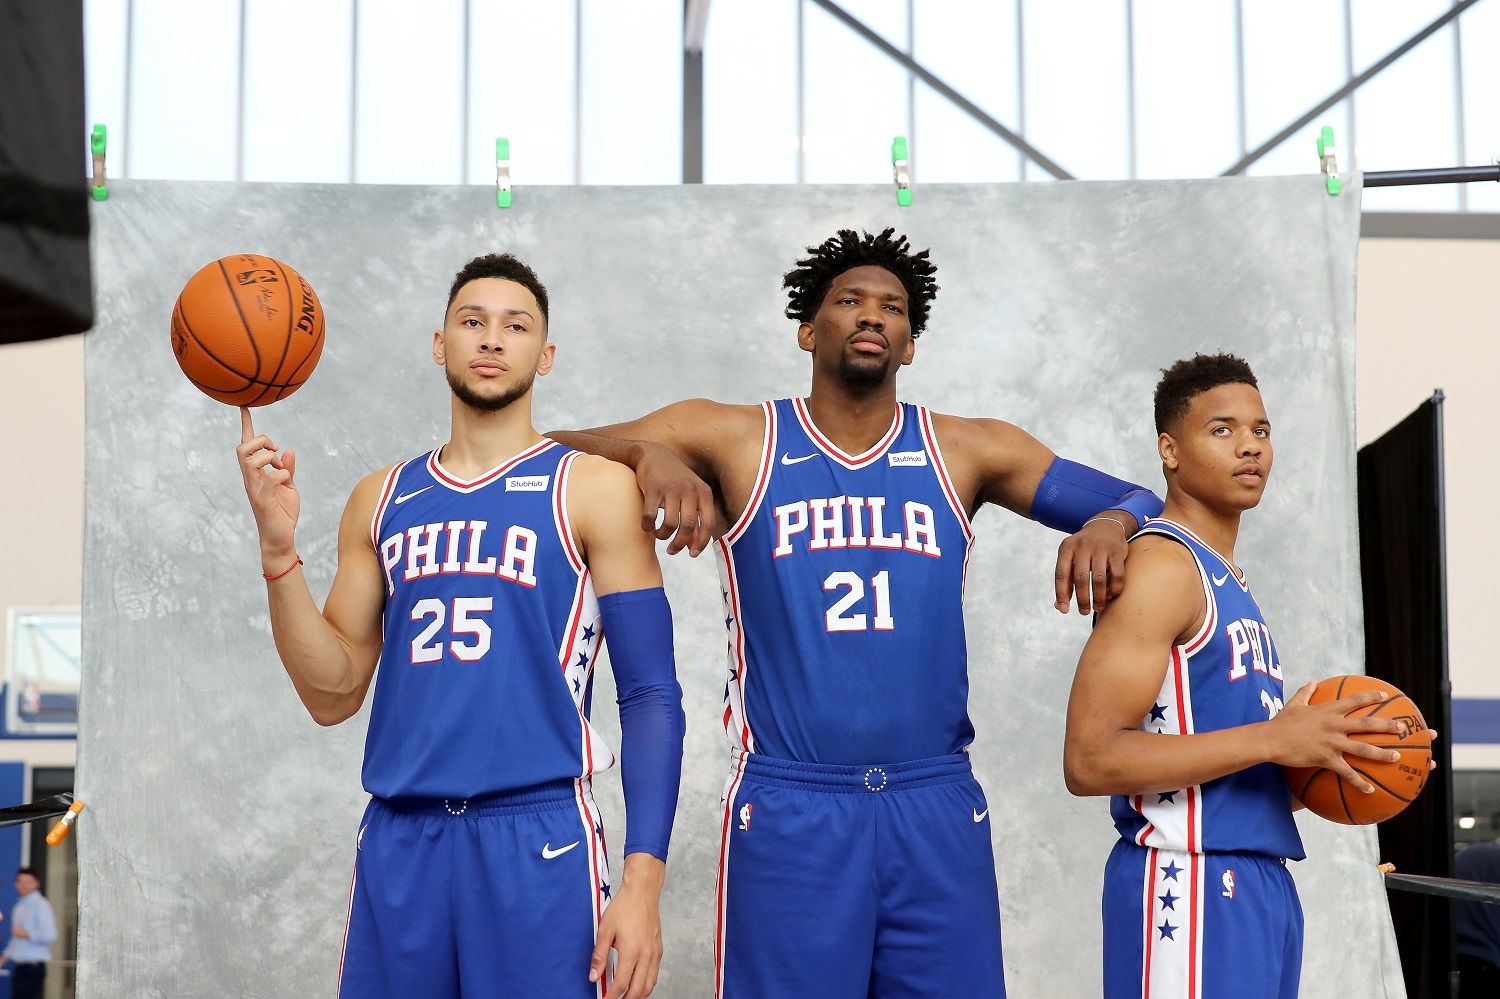 CAMDEN, NJ - SEPTEMBER 25:  Ben Simmons #25, Joel Embiid #21 and Markelle Fultz #20 of the Philadelphia 76ers pose for the camera during the Philadelphia 76ers Media Day on September 25, 2017 at the Philadelphia 76ers Training Complex in Camden, New Jersey.NOTE TO USER: User expressly acknowledges and agrees that, by downloading and/or using this photograph, user is consenting to the terms and conditions of the Getty Images License Agreement.  (Photo by Abbie Parr/Getty Images)